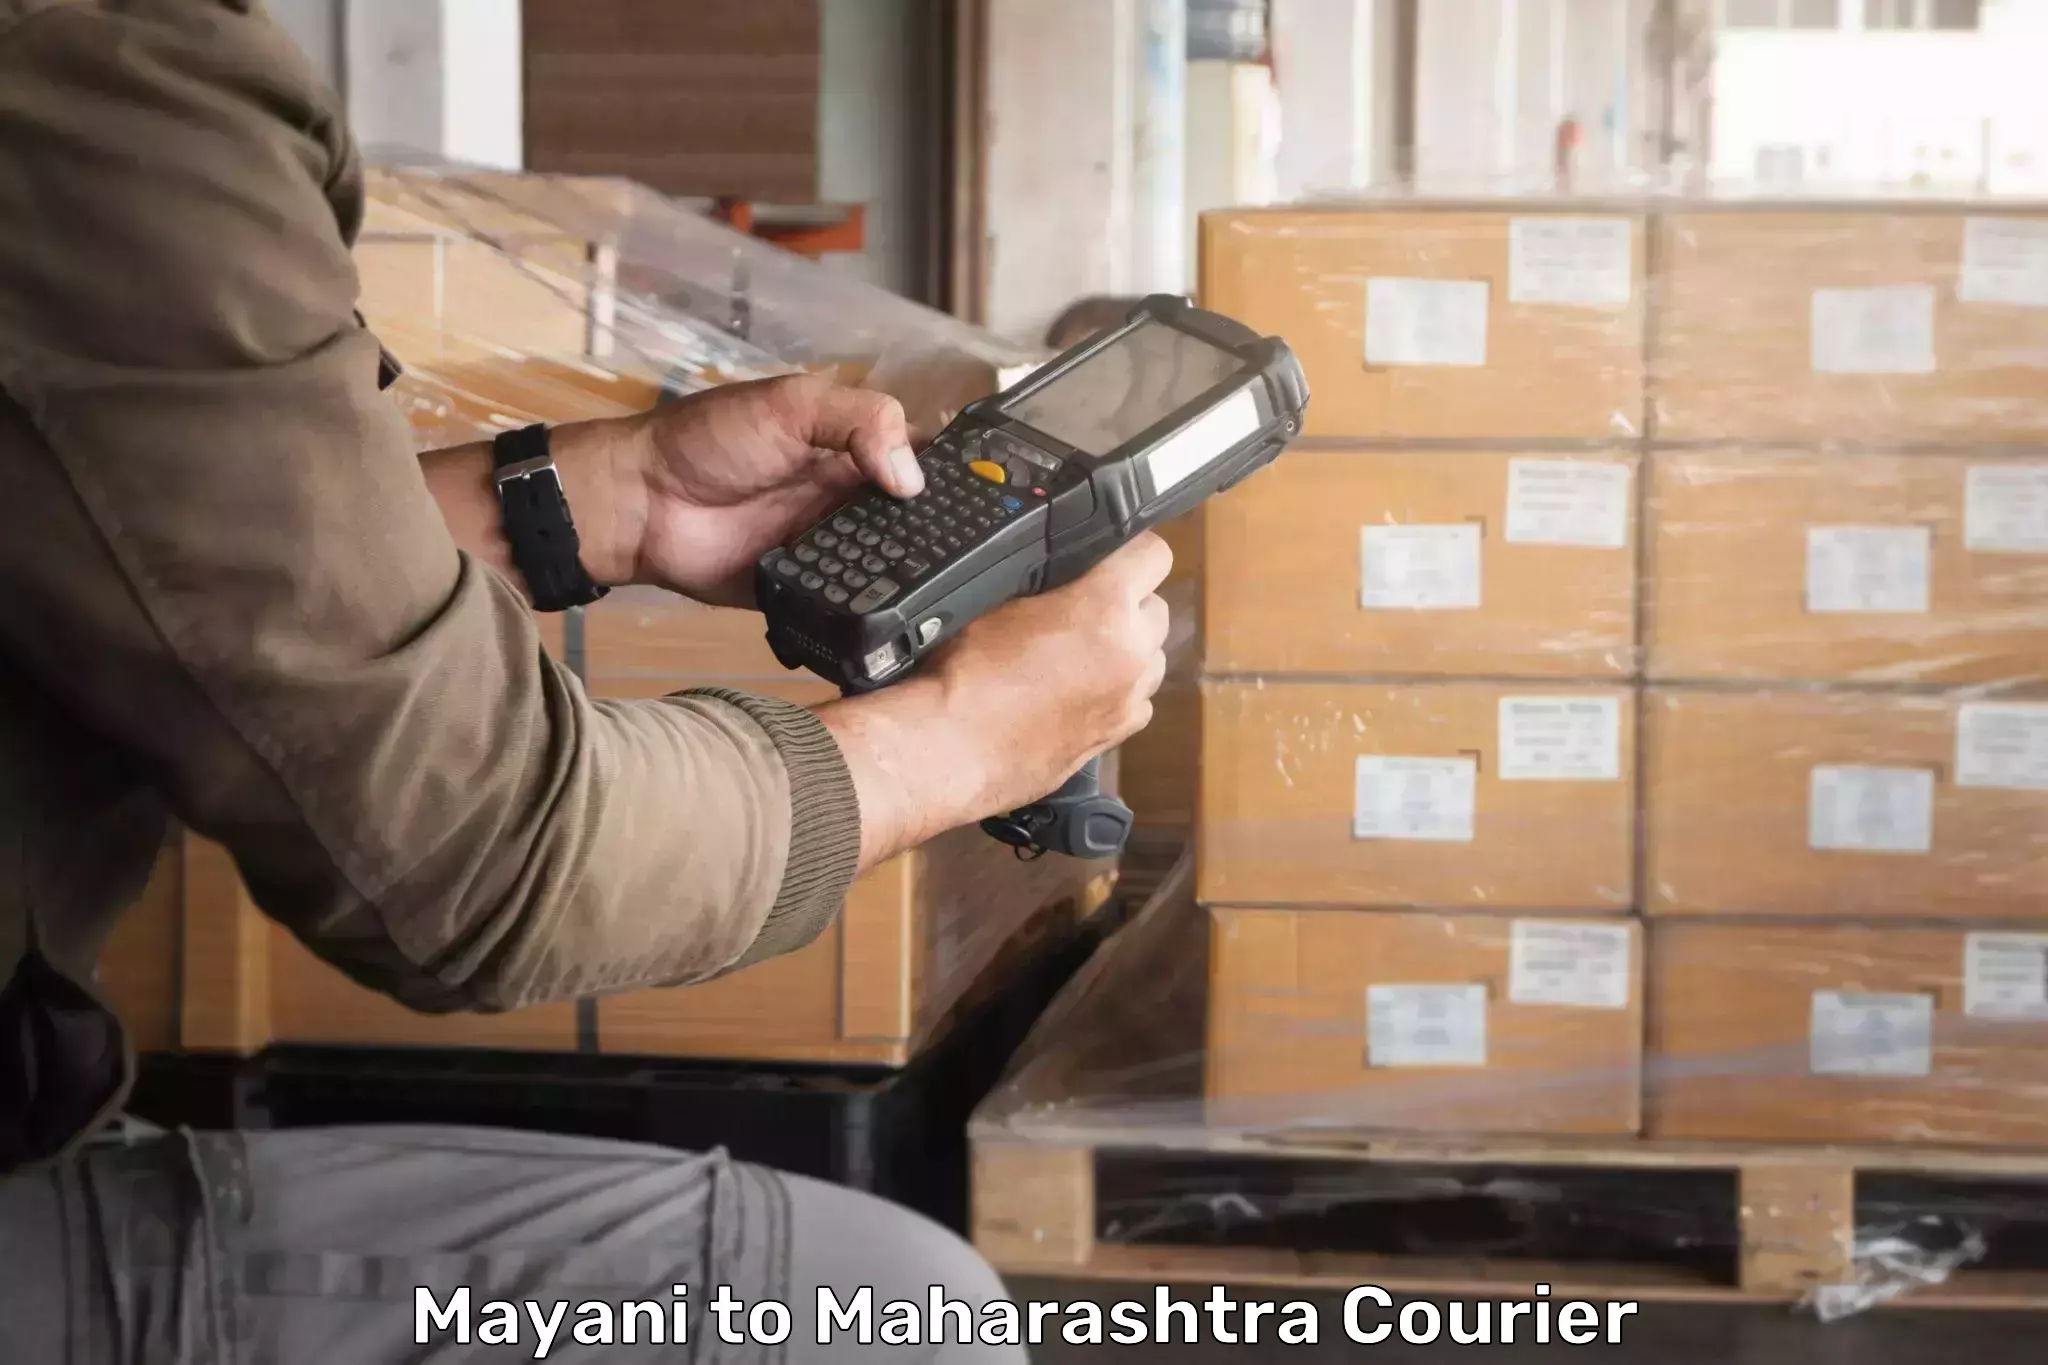 Nationwide delivery network Mayani to Mahim